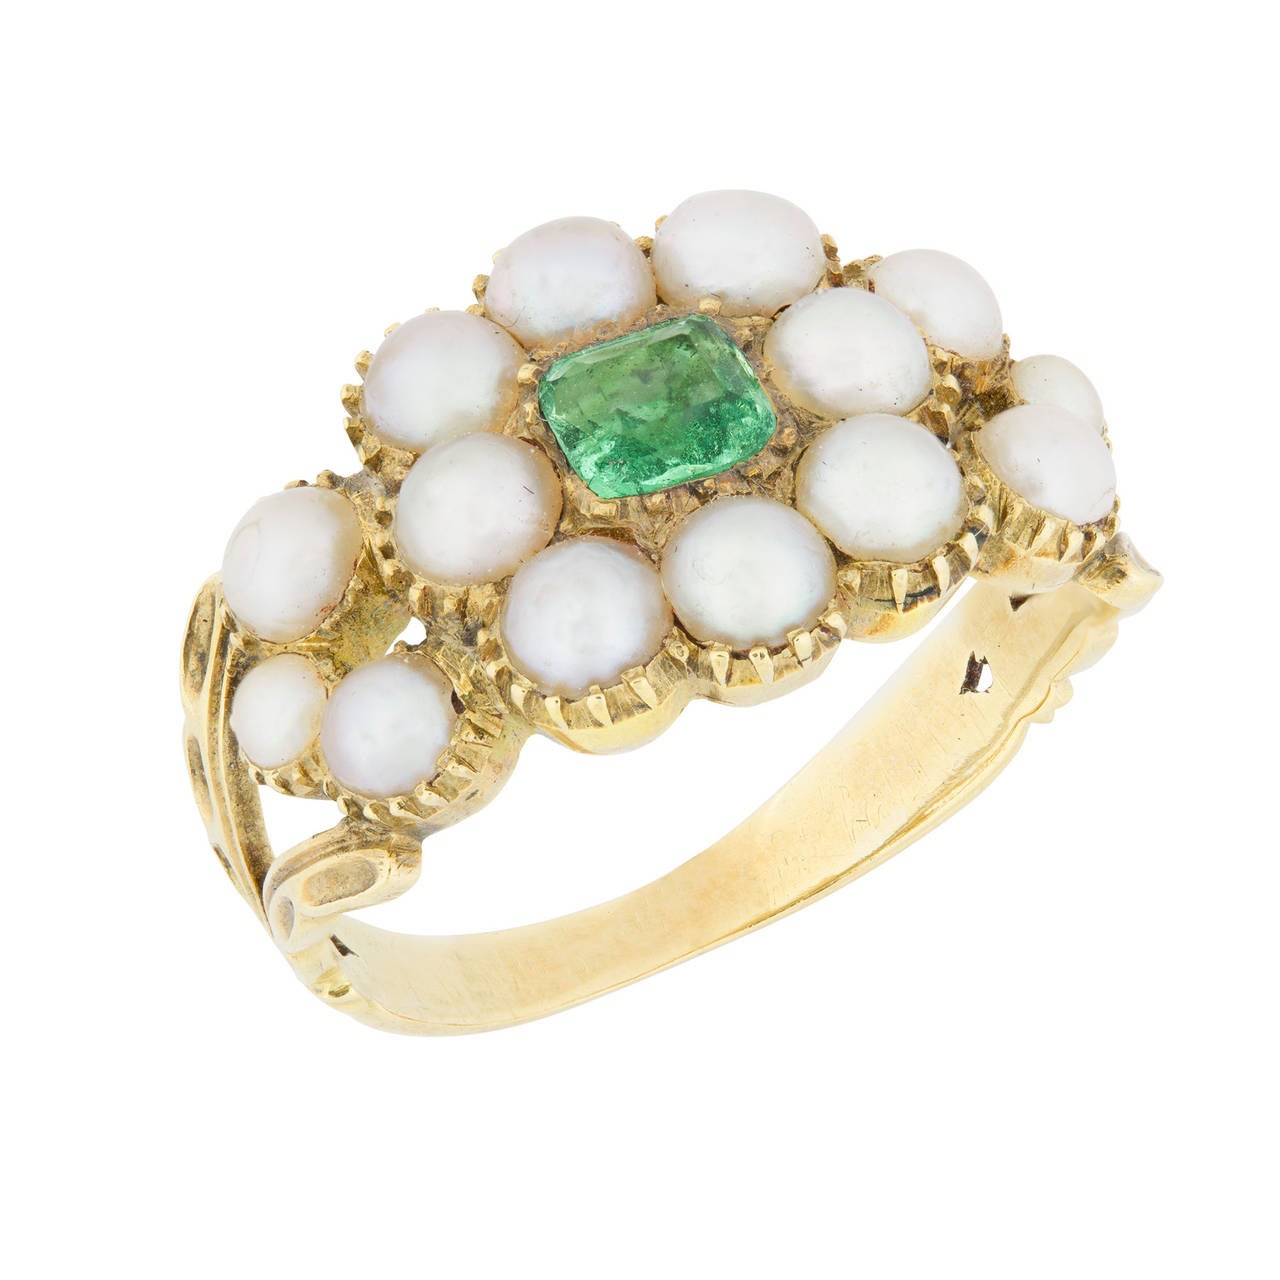 A Regency pearl and emerald cluster ring, the square step-cut emerald measuring approximately 4 x 4mm, set to the centre of a cluster surround of eight natural pearls measuring approximately 3.4mm in diameter, three pearls set to each shoulder, all